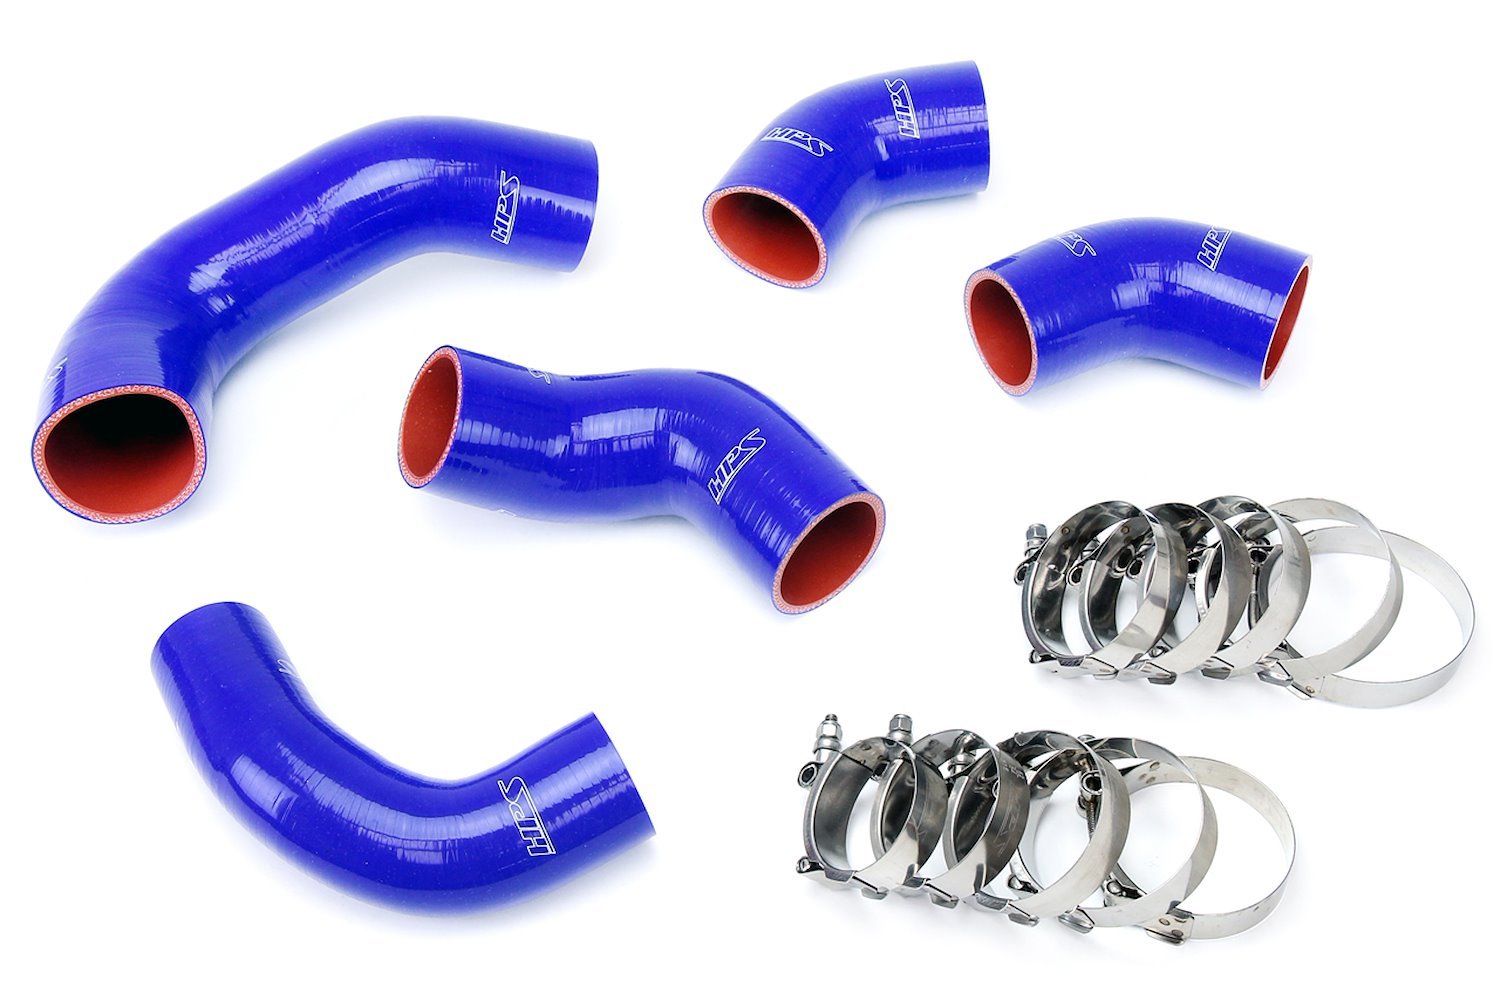 57-1227-BLUE Intercooler Hose Kit, High-Temp 4-Ply Reinforced Silicone, Replace OEM Rubber Intercooler Turbo Boots